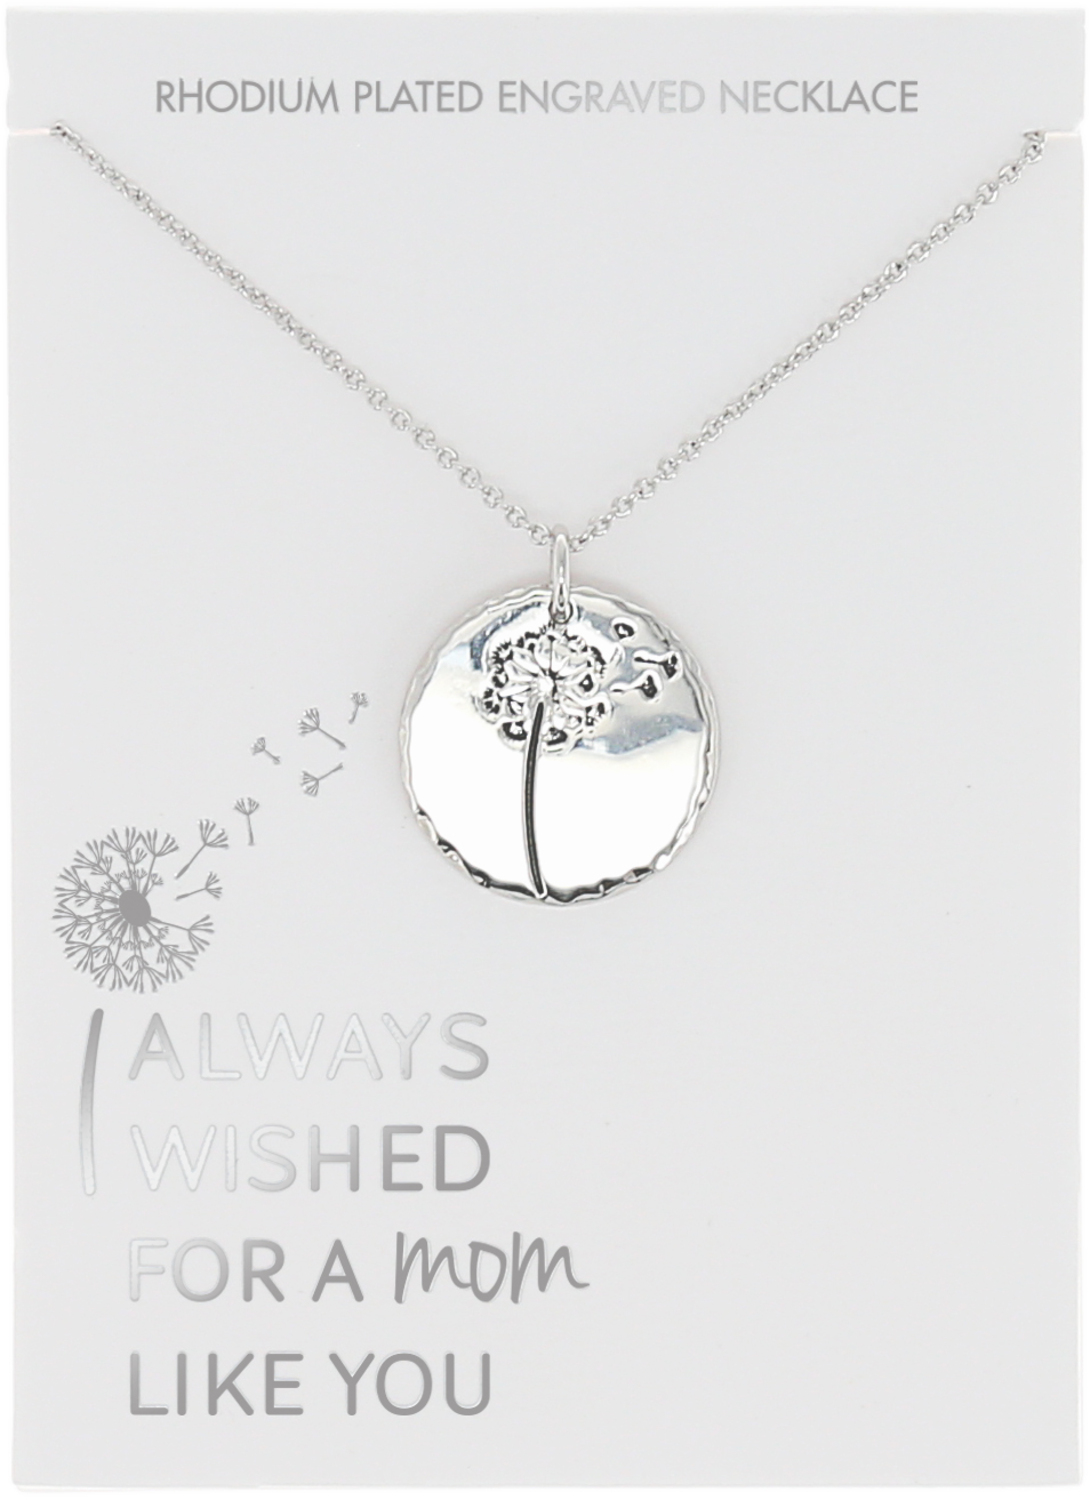 Mom by I Always Wished - Mom - 16.5"-18.5" Engraved Rhodium Plated  Necklace